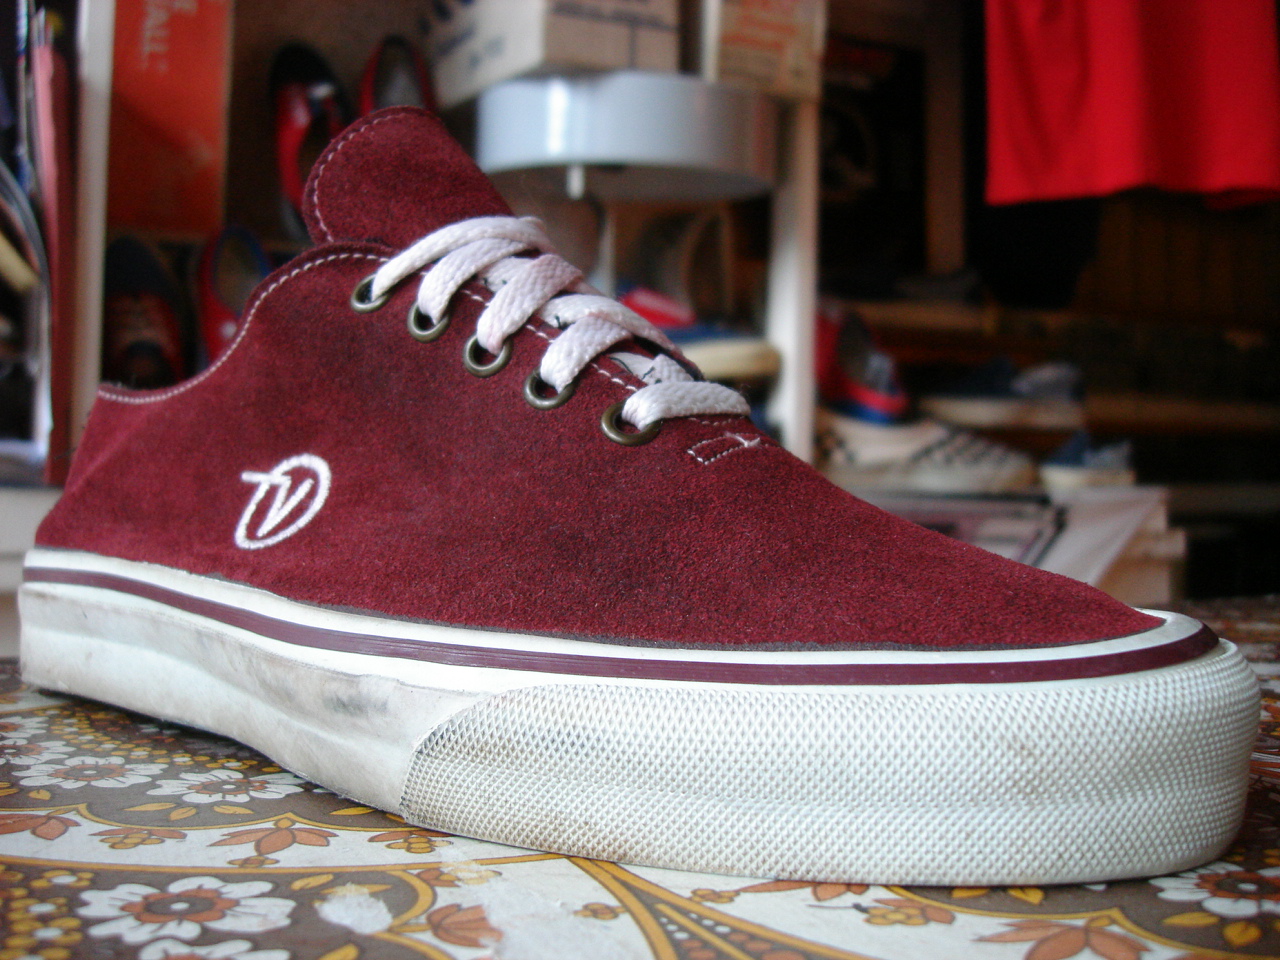 theothersideofthepillow: vintage VANS style #78 1 PIECE SUEDE US9 